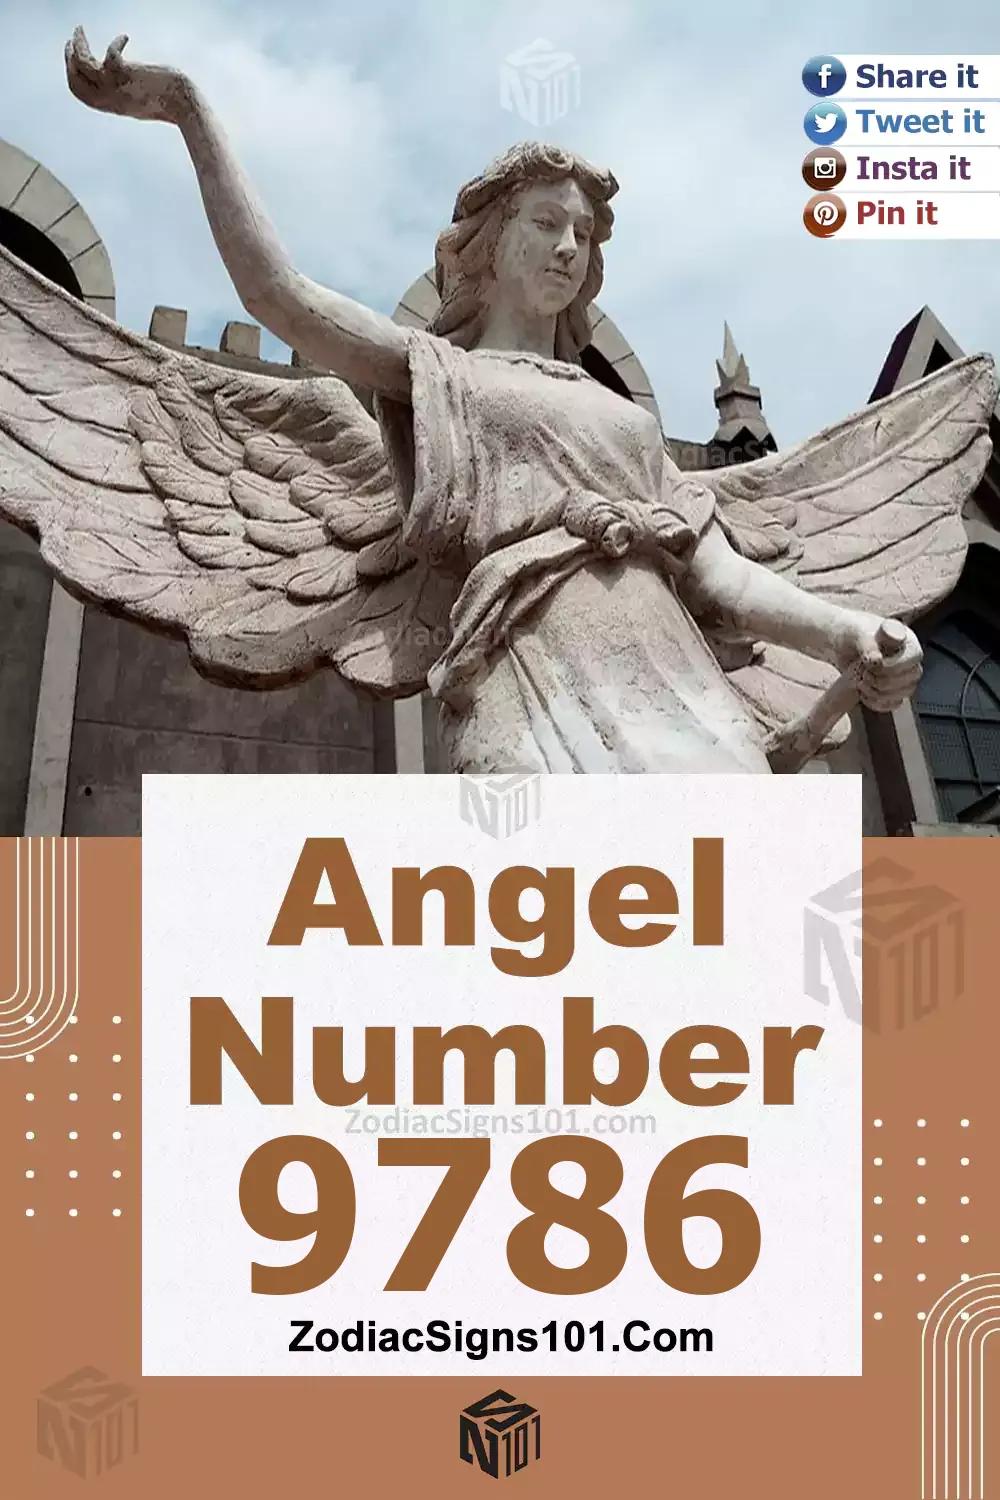 9786 Angel Number Meaning